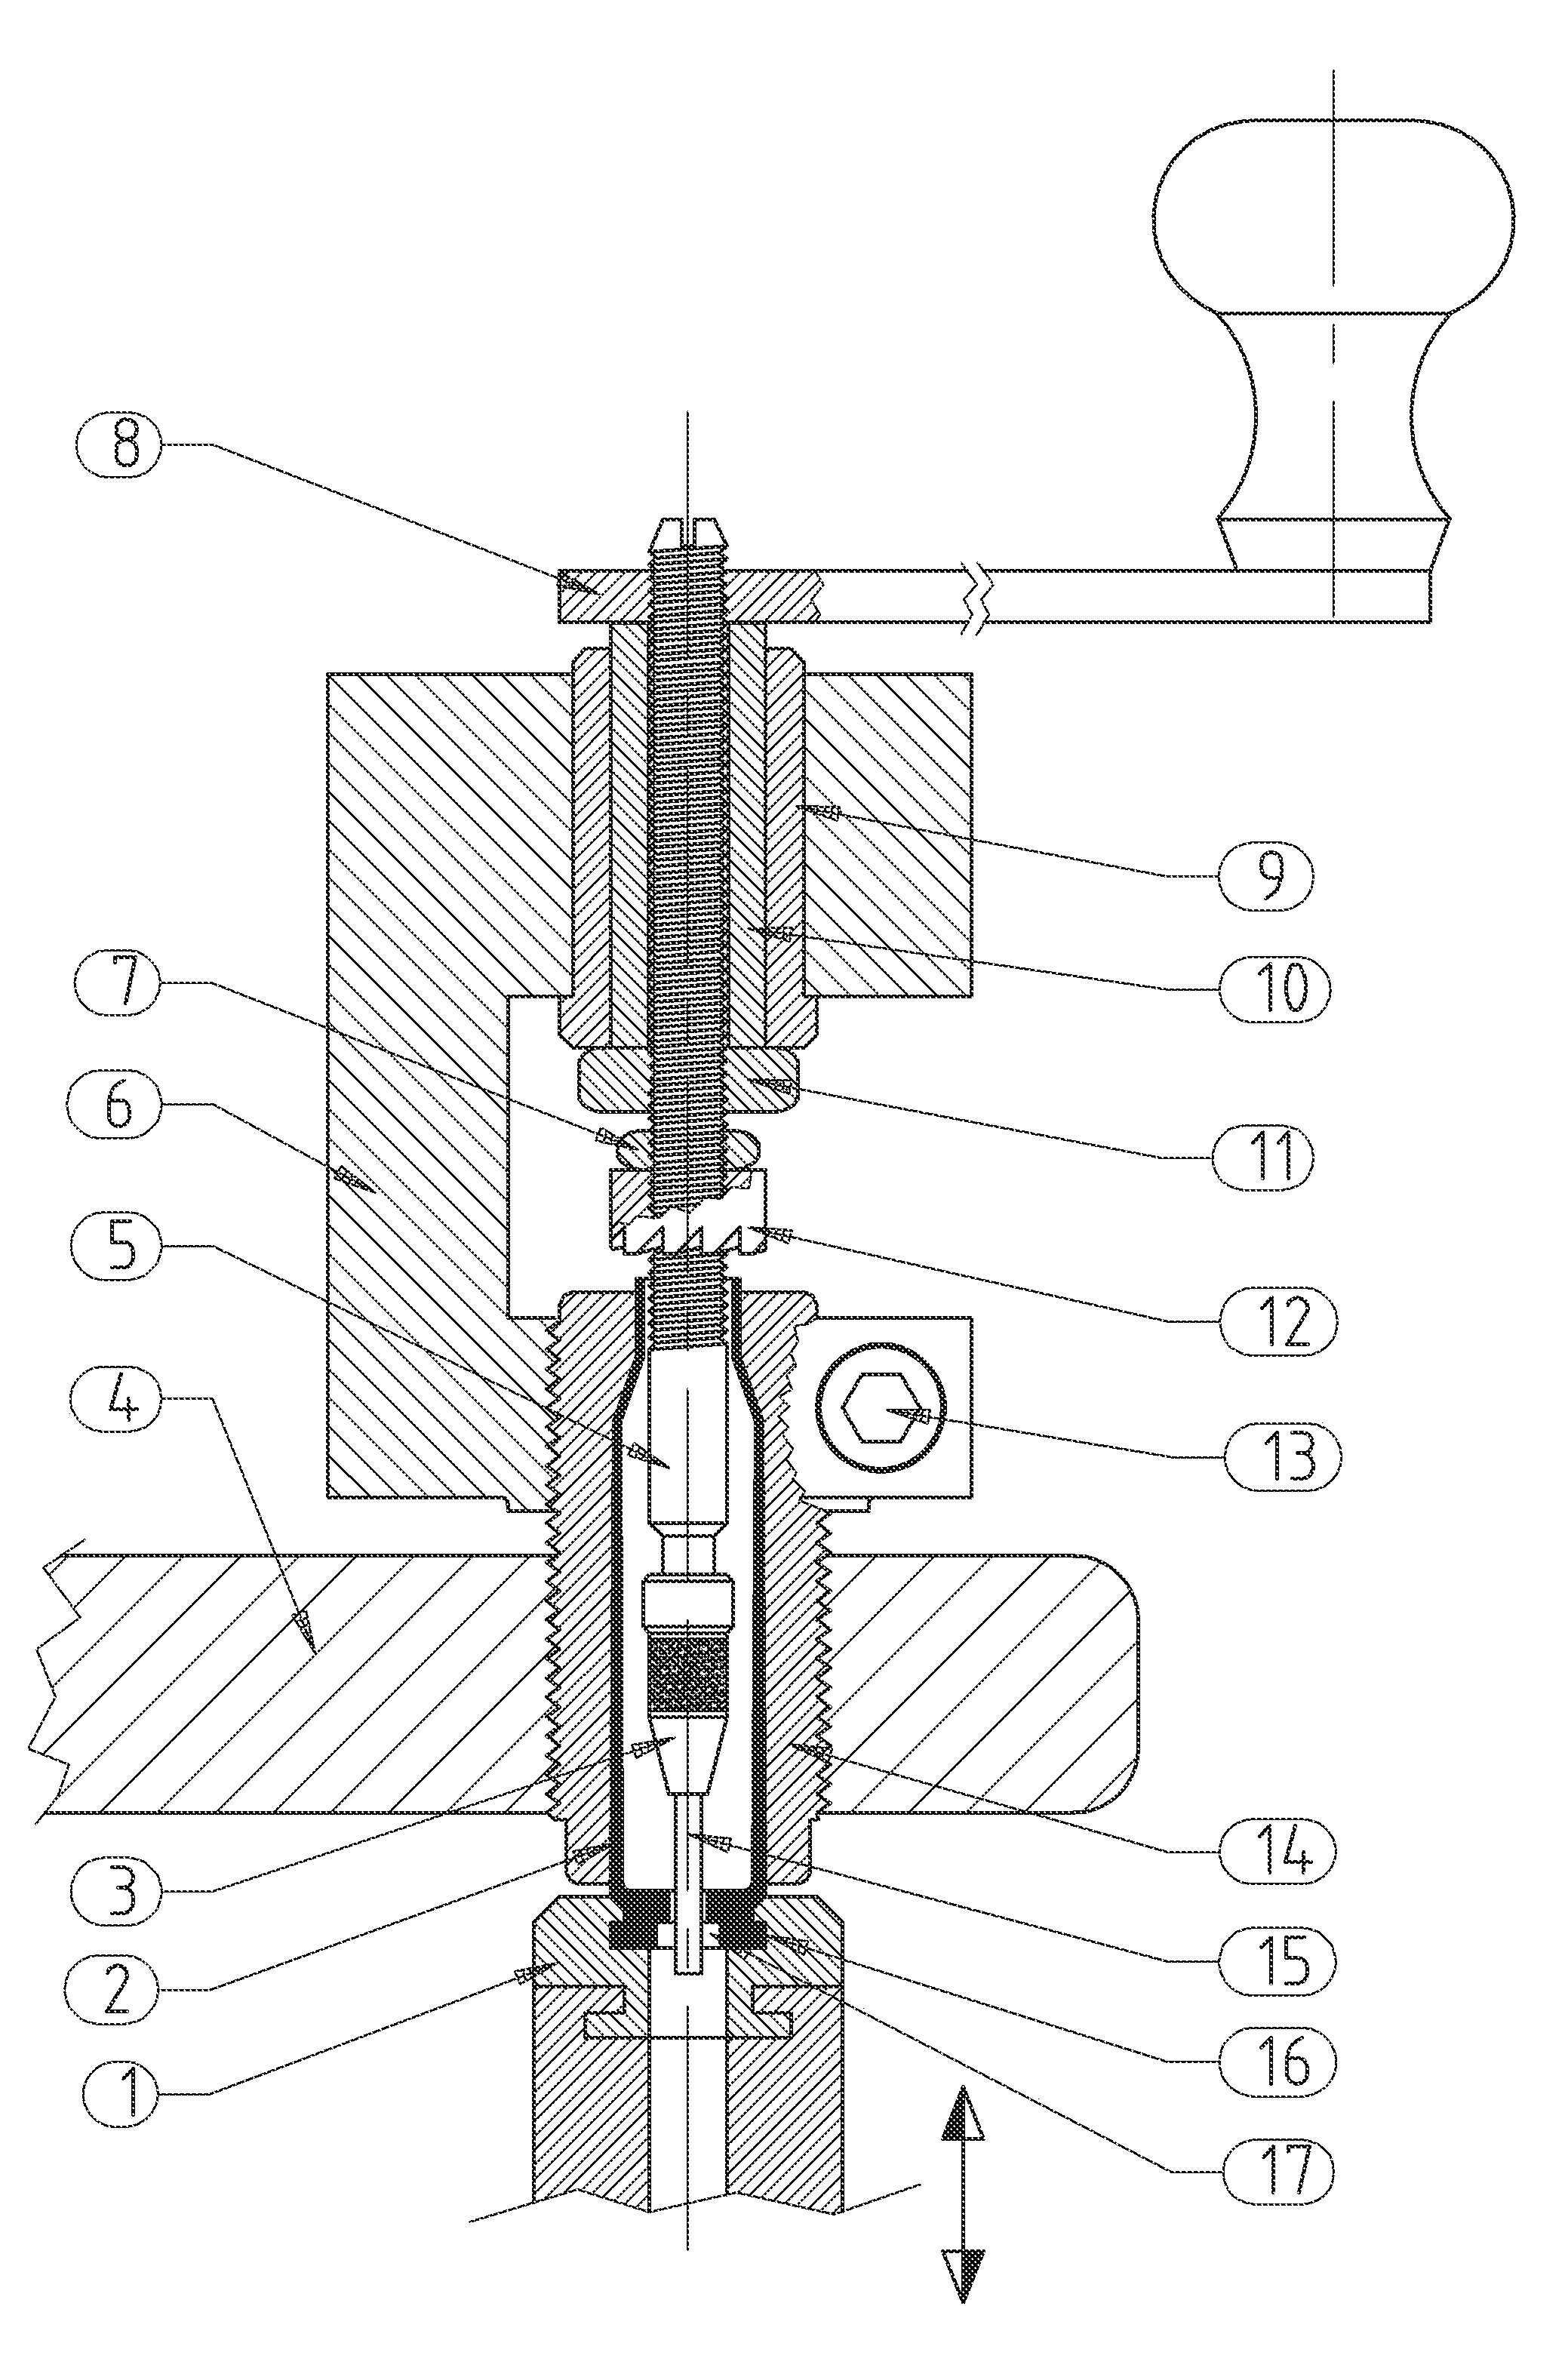 Trimming and sizing device to produce or prepare empty cartridge cases and a method to produce or prepare empty cartridge cases